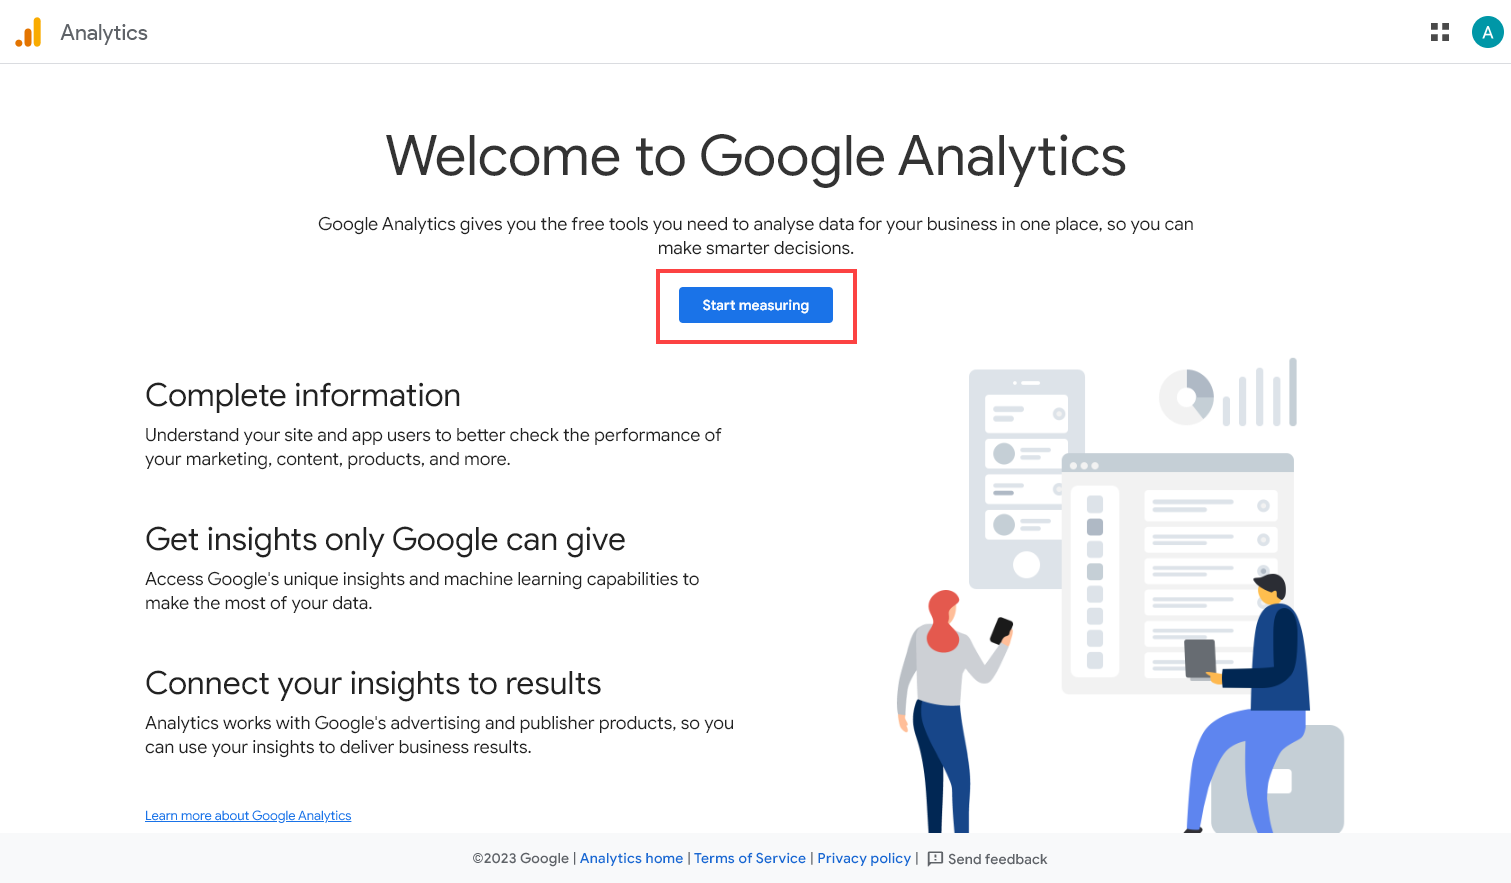 Google Analytics Welcome Screen With Brief Information and a Start Measuring Button